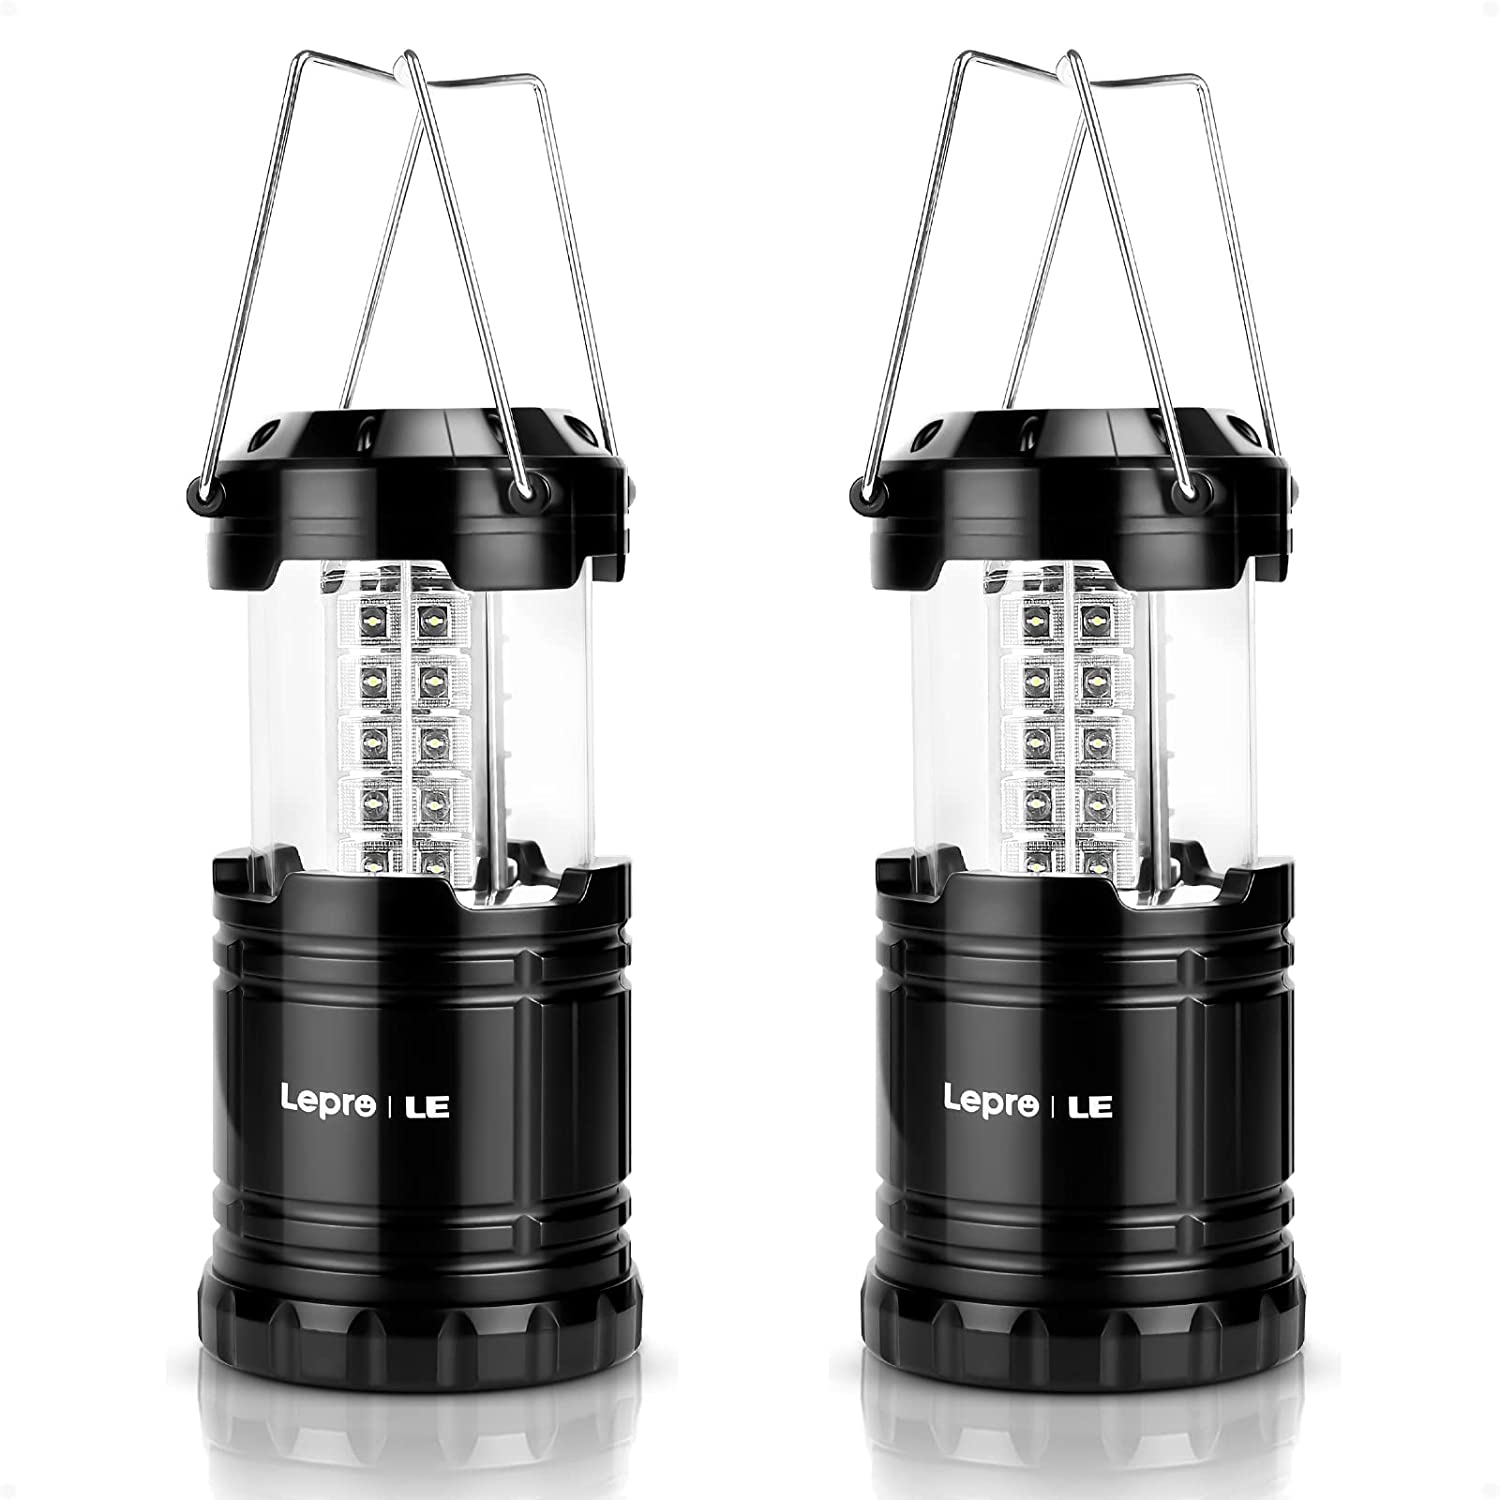 Lepro LED Camping Lantern, Camping Accessories, 3 Lighting Modes, Hanging  Tent Light Bulbs with Clip Hook for Camping, Hiking, Hurricane, Storms